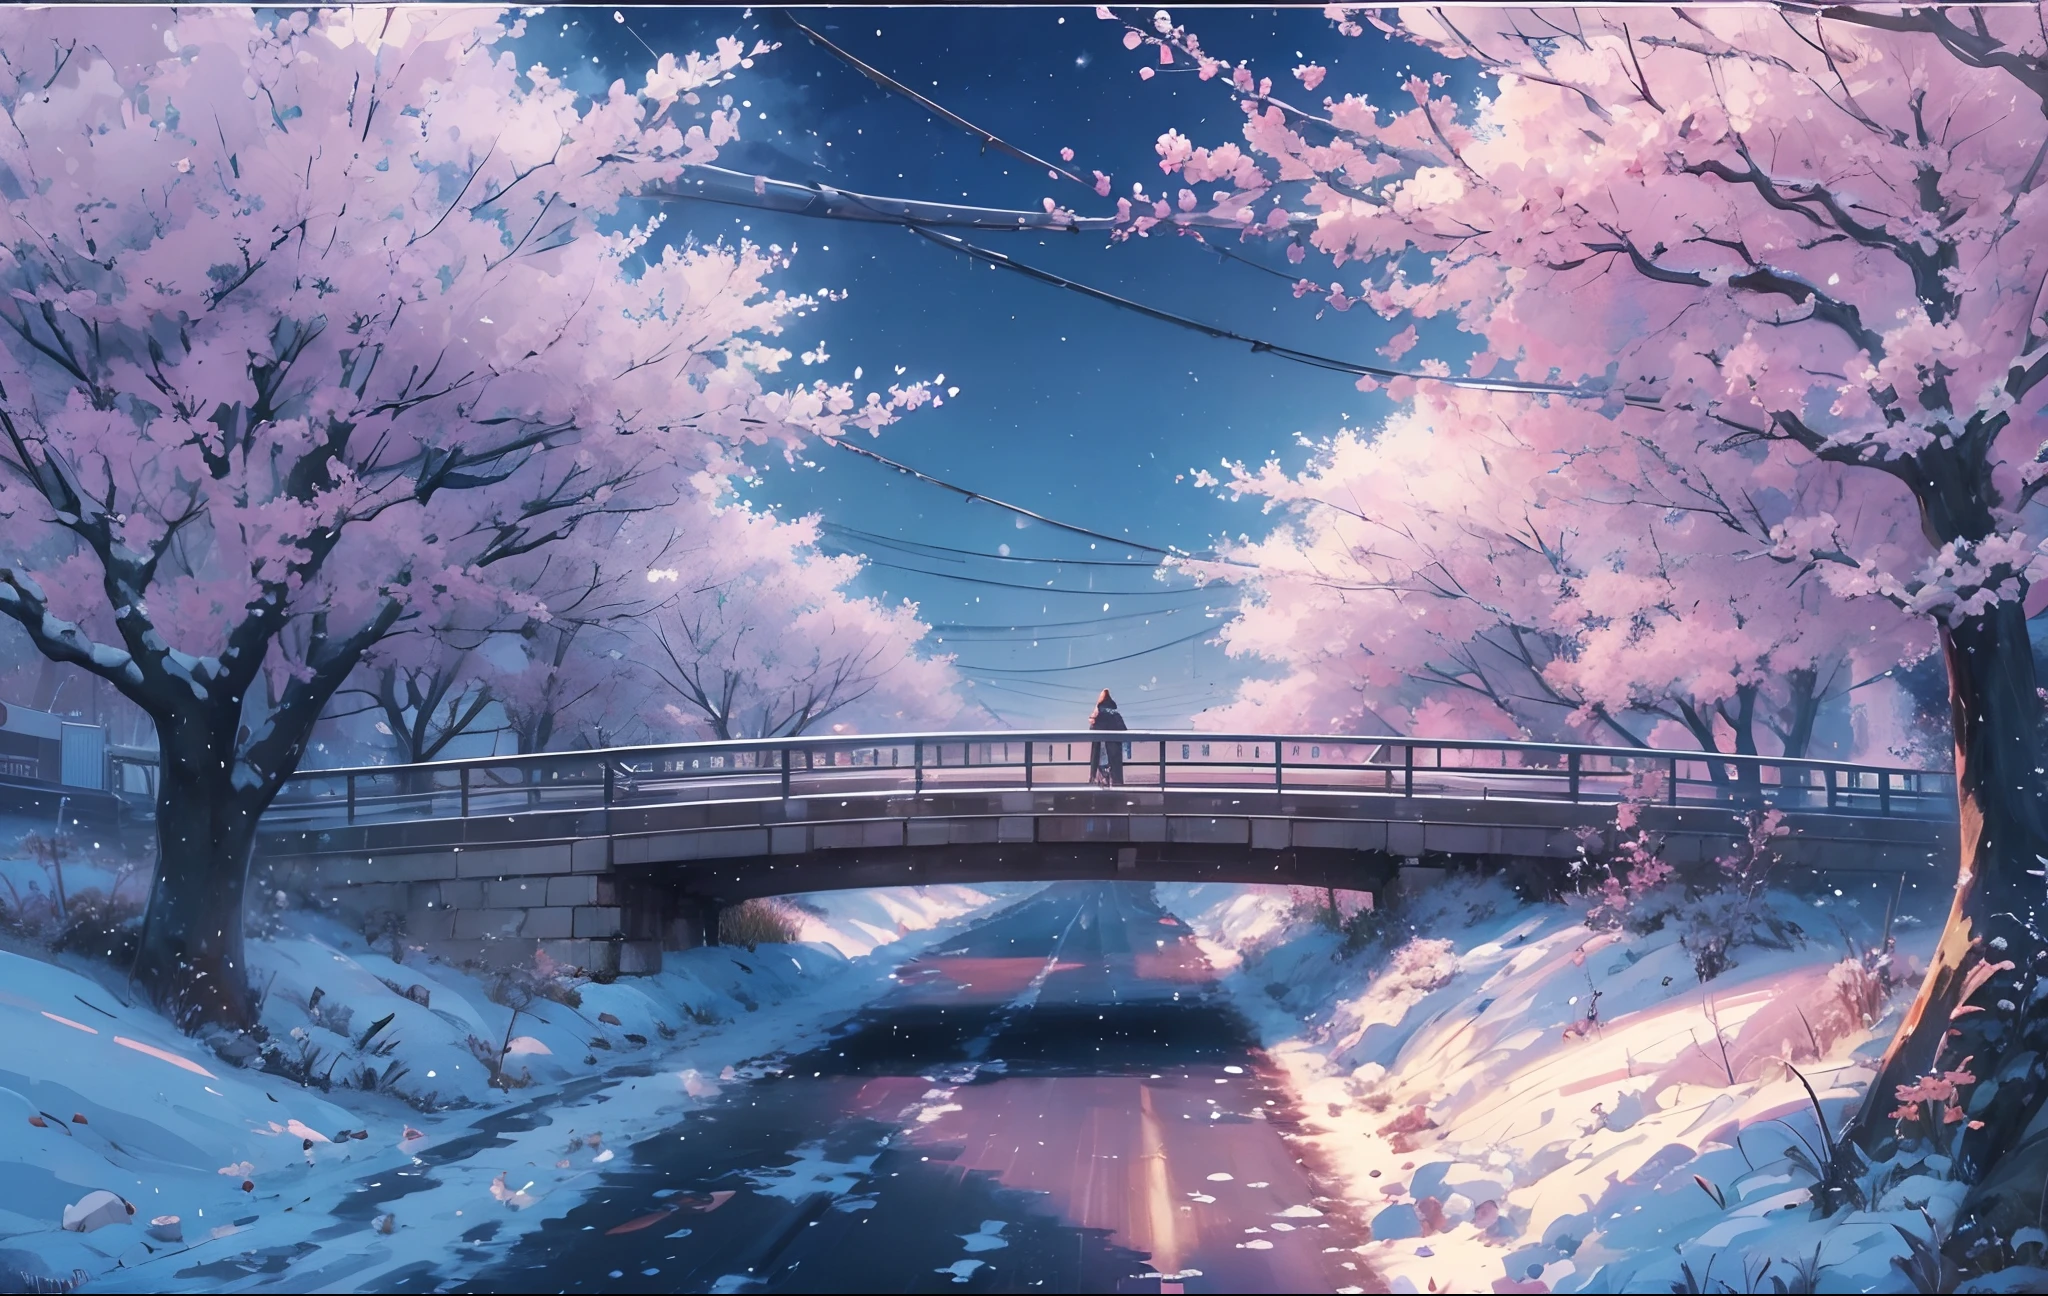 masterpiece, concept art, wide shot, panoramic, a street at night with a bridge in the distance,  a spiral in the sky, (winter), snowy, a detailed matte painting, by Makoto Shinkai, widescreen shot, driveway, sakura trees-lined path, miyazaki's animated film, endless night, sakura trees along street, art for the film in color, detailed digital anime art, (epic composition, epic proportion), HD